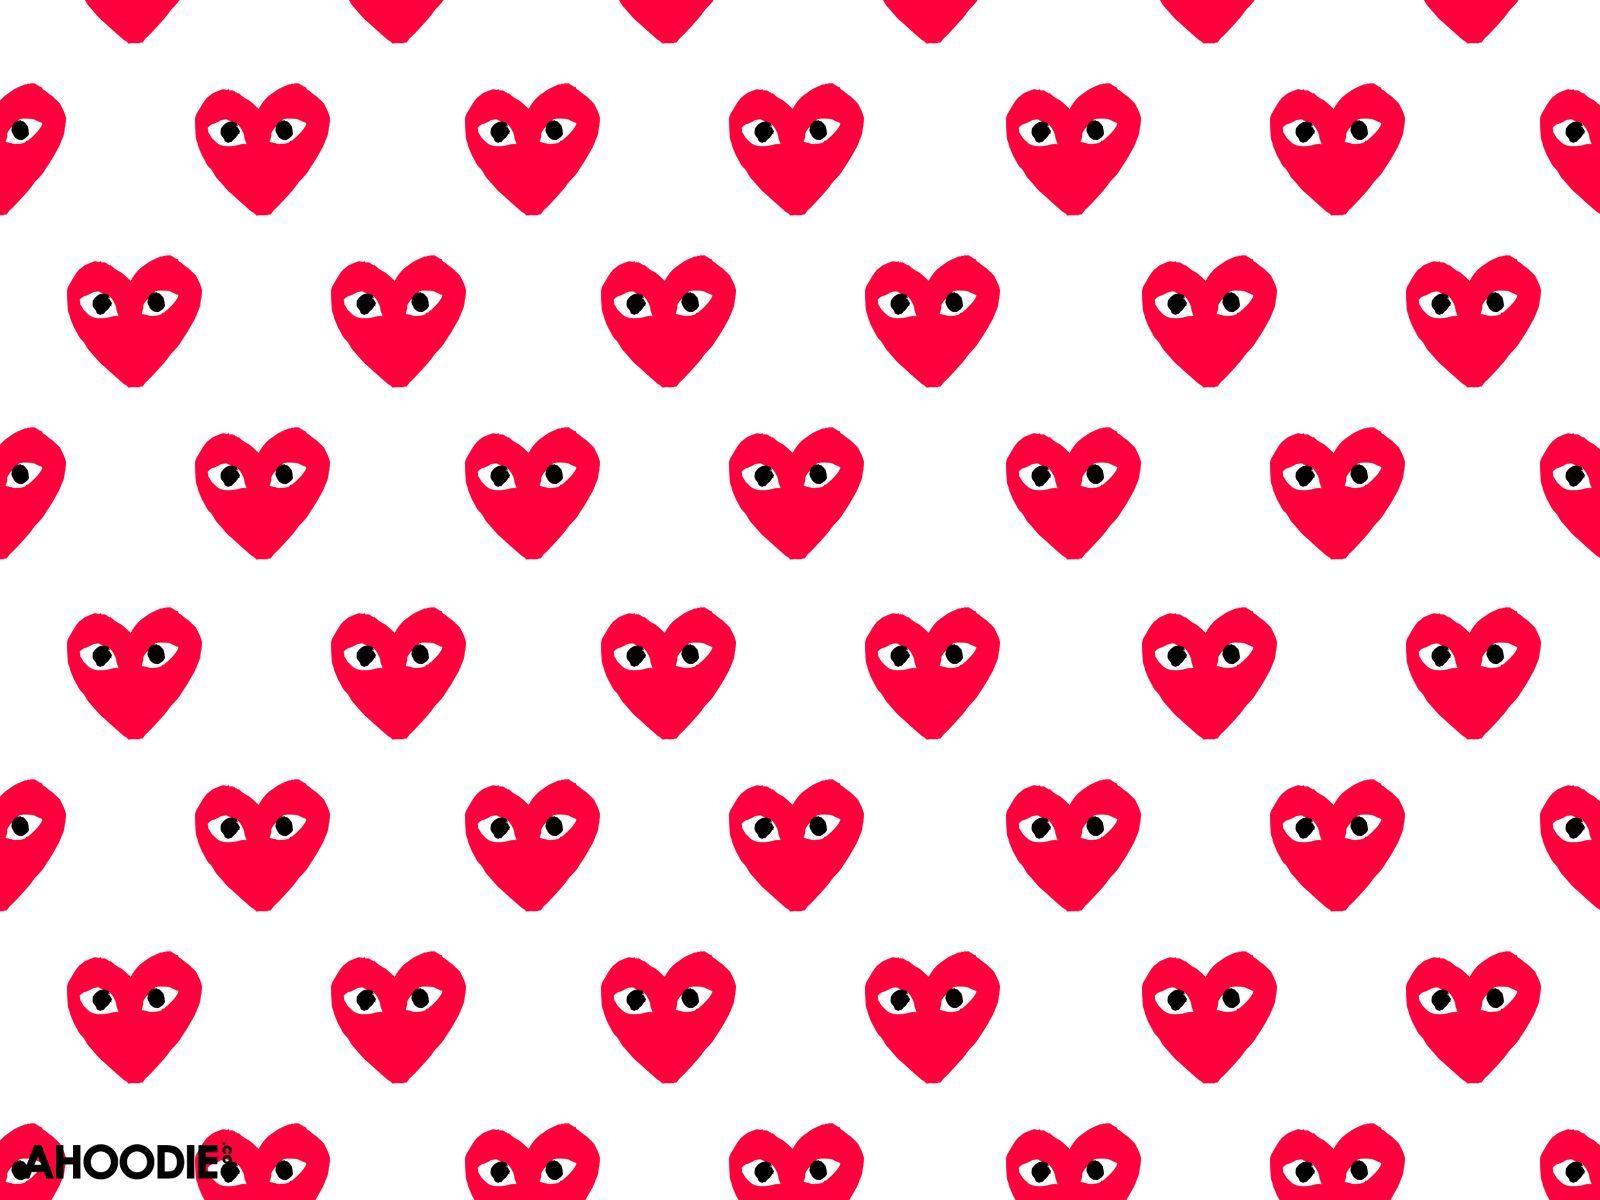 Cdg play HD wallpapers  Pxfuel